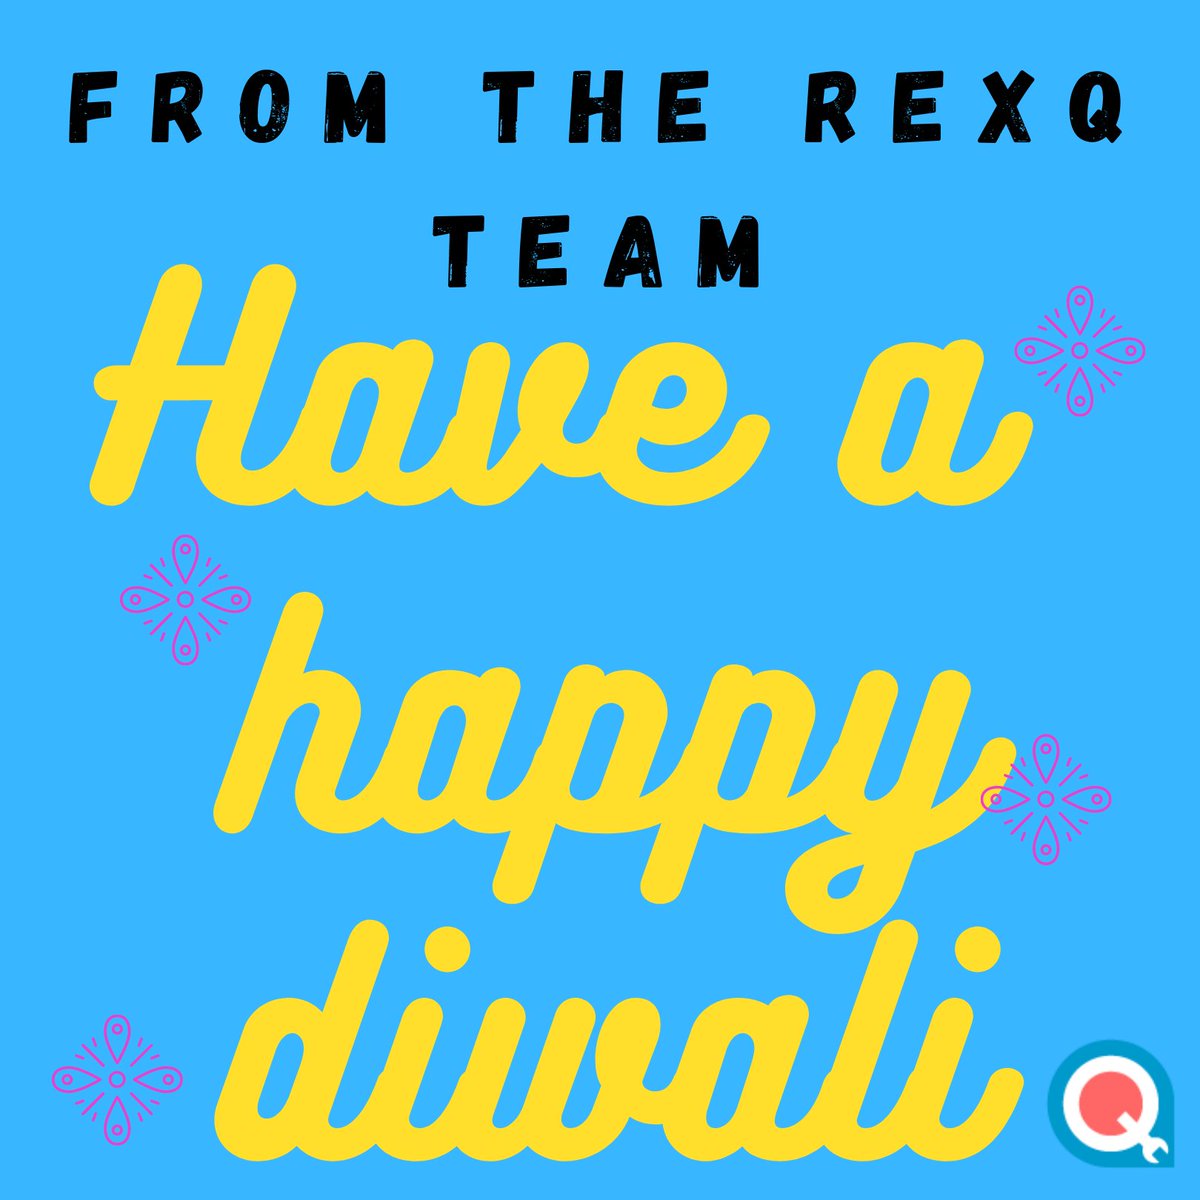 Wishing you a Diwali that brings happiness prosperity and joy to you and all your family!!

#breakdownservice #tow #towing #towingservice #roadsideassistance #outoffuel #wrongfuel #towtruck #flattyres #mechanicalfault #flatbattery #lockedout #rexq #rexqhq #diwali